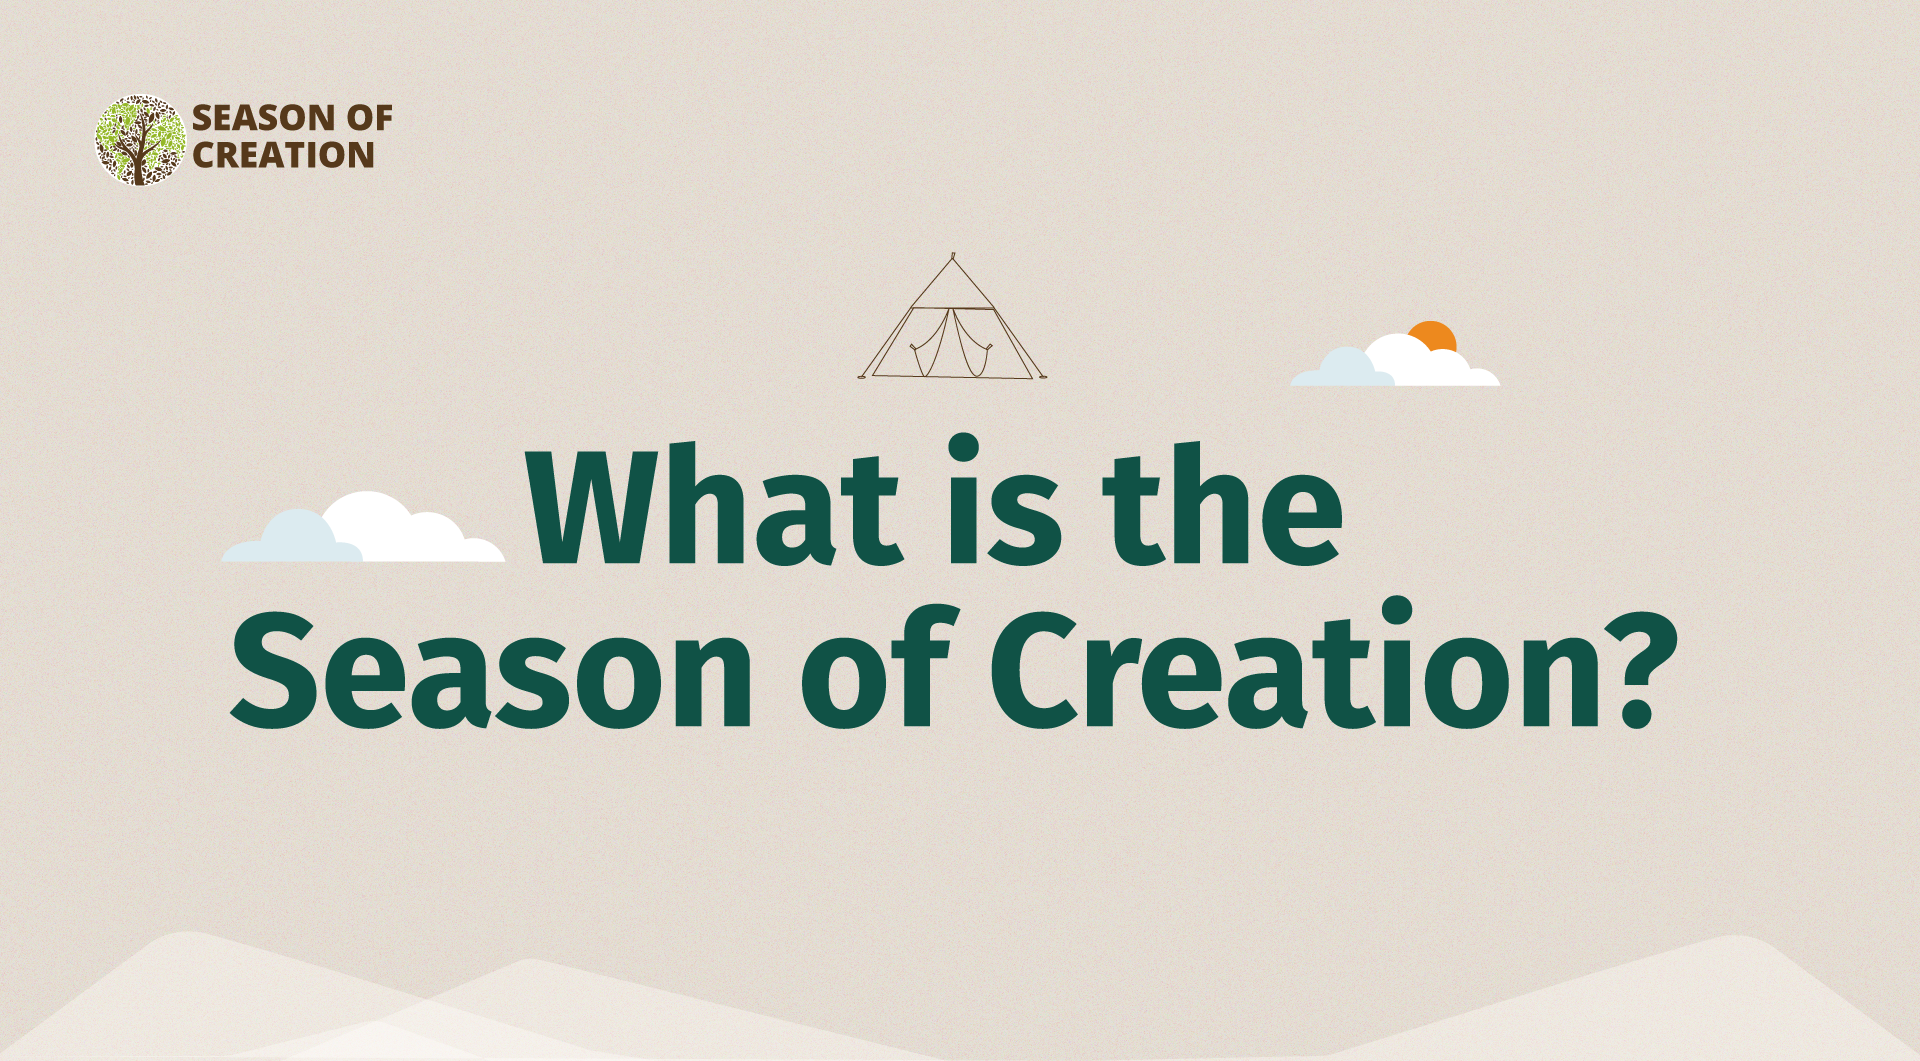 What is the Season of Creation?